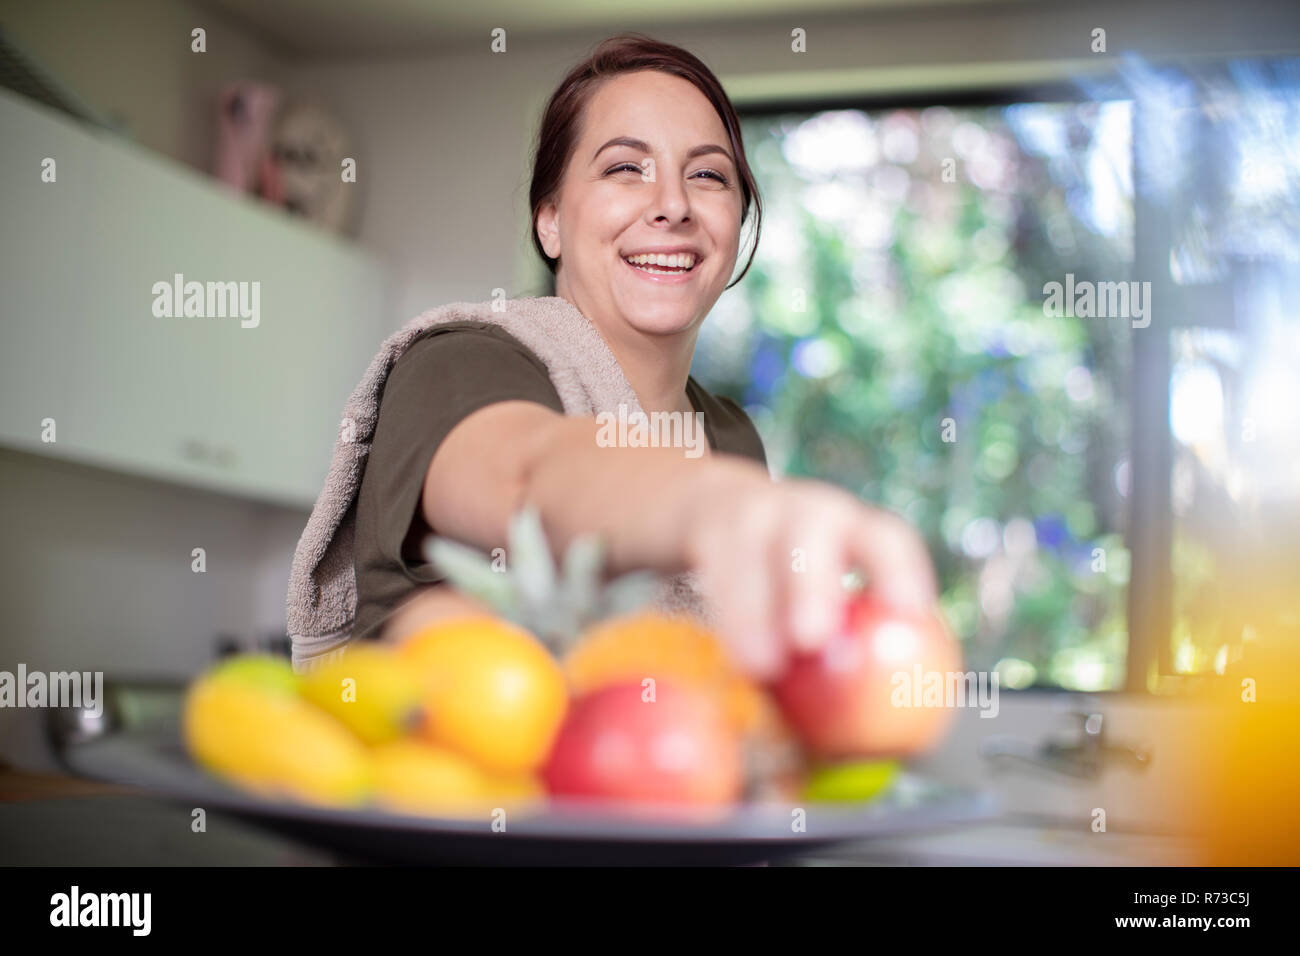 Woman having fruits for breakfast at home Stock Photo